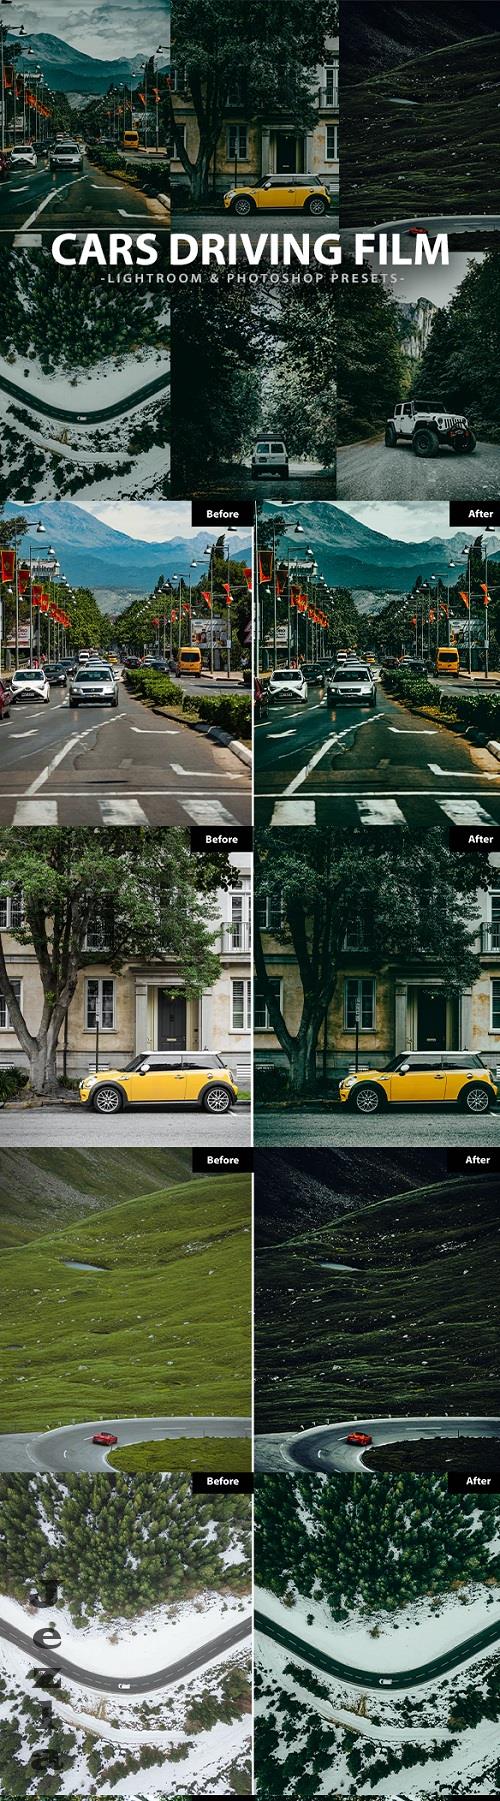 6 Cars Driving Film Lightroom and Photoshop Presets - 46593809